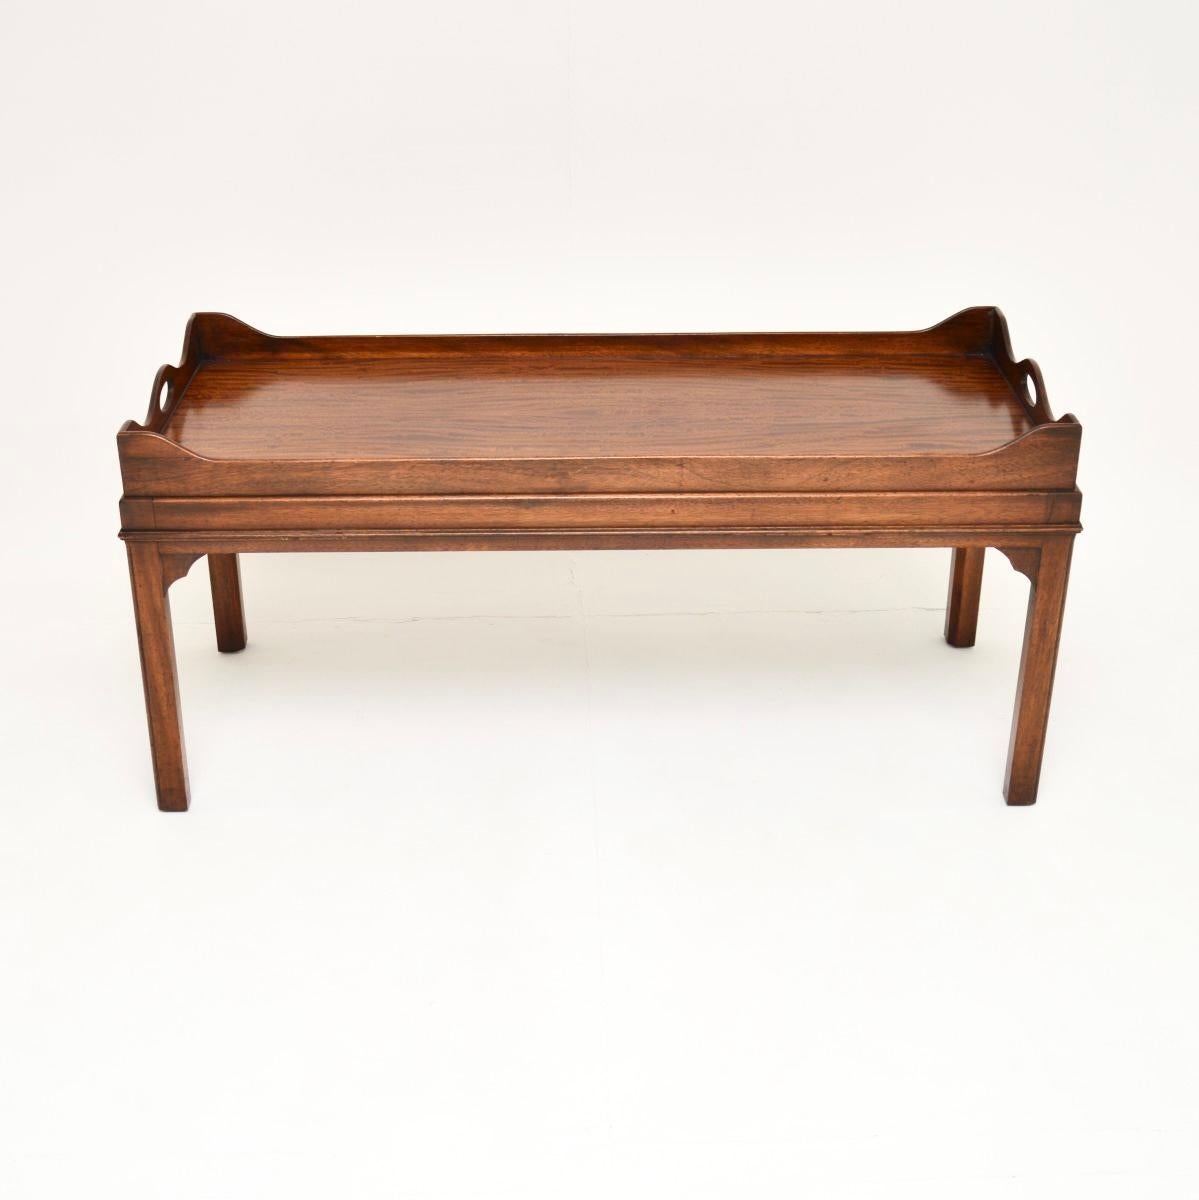 A smart and beautifully made antique Georgian style tray top coffee table. This was made in England, it dates from around the 1950’s.

The quality is superb, this is a great looking item and it is a very useful size. The top has a shaped raised edge